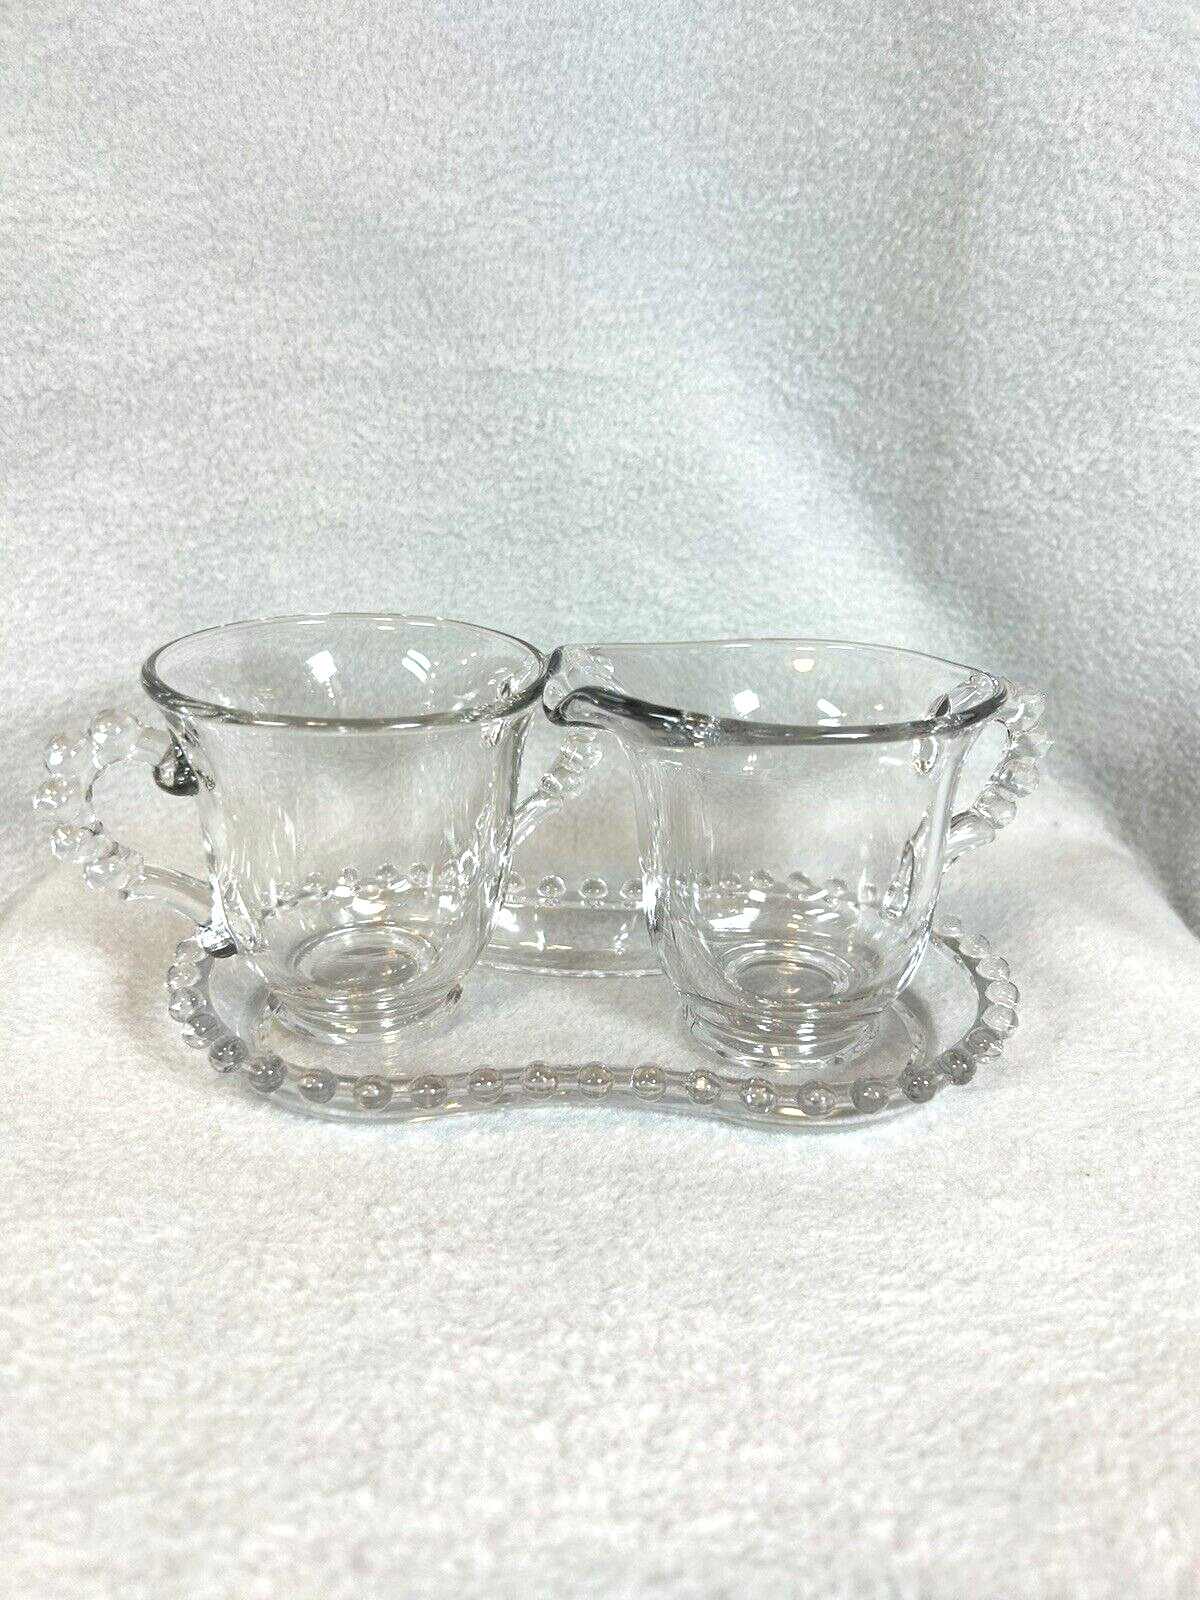 Candlewick By Imperial Sugar Creamer Set With Tray Vintage 3.5 In Tall On Tray